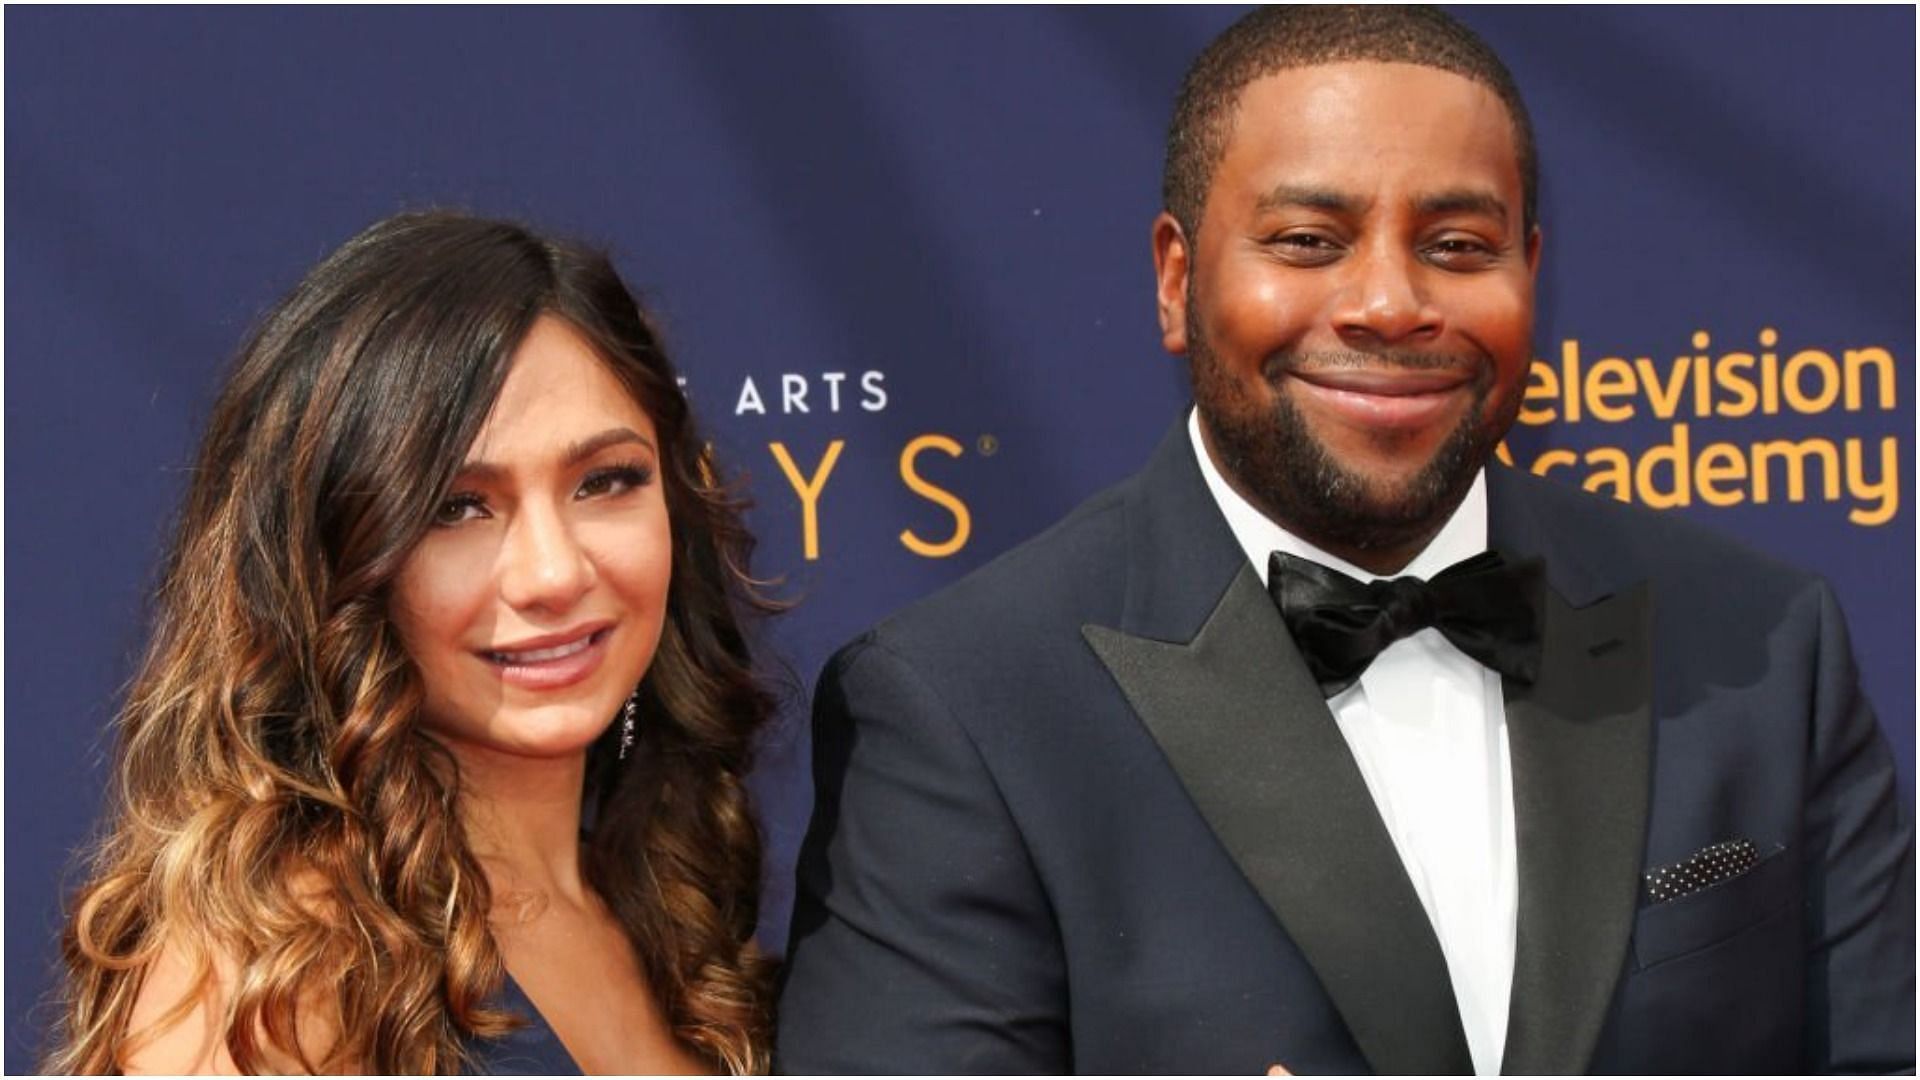 Christina Evangeline and Kenan Thompson got married in 2011 (Image via Paul Archuleta/Getty Images)